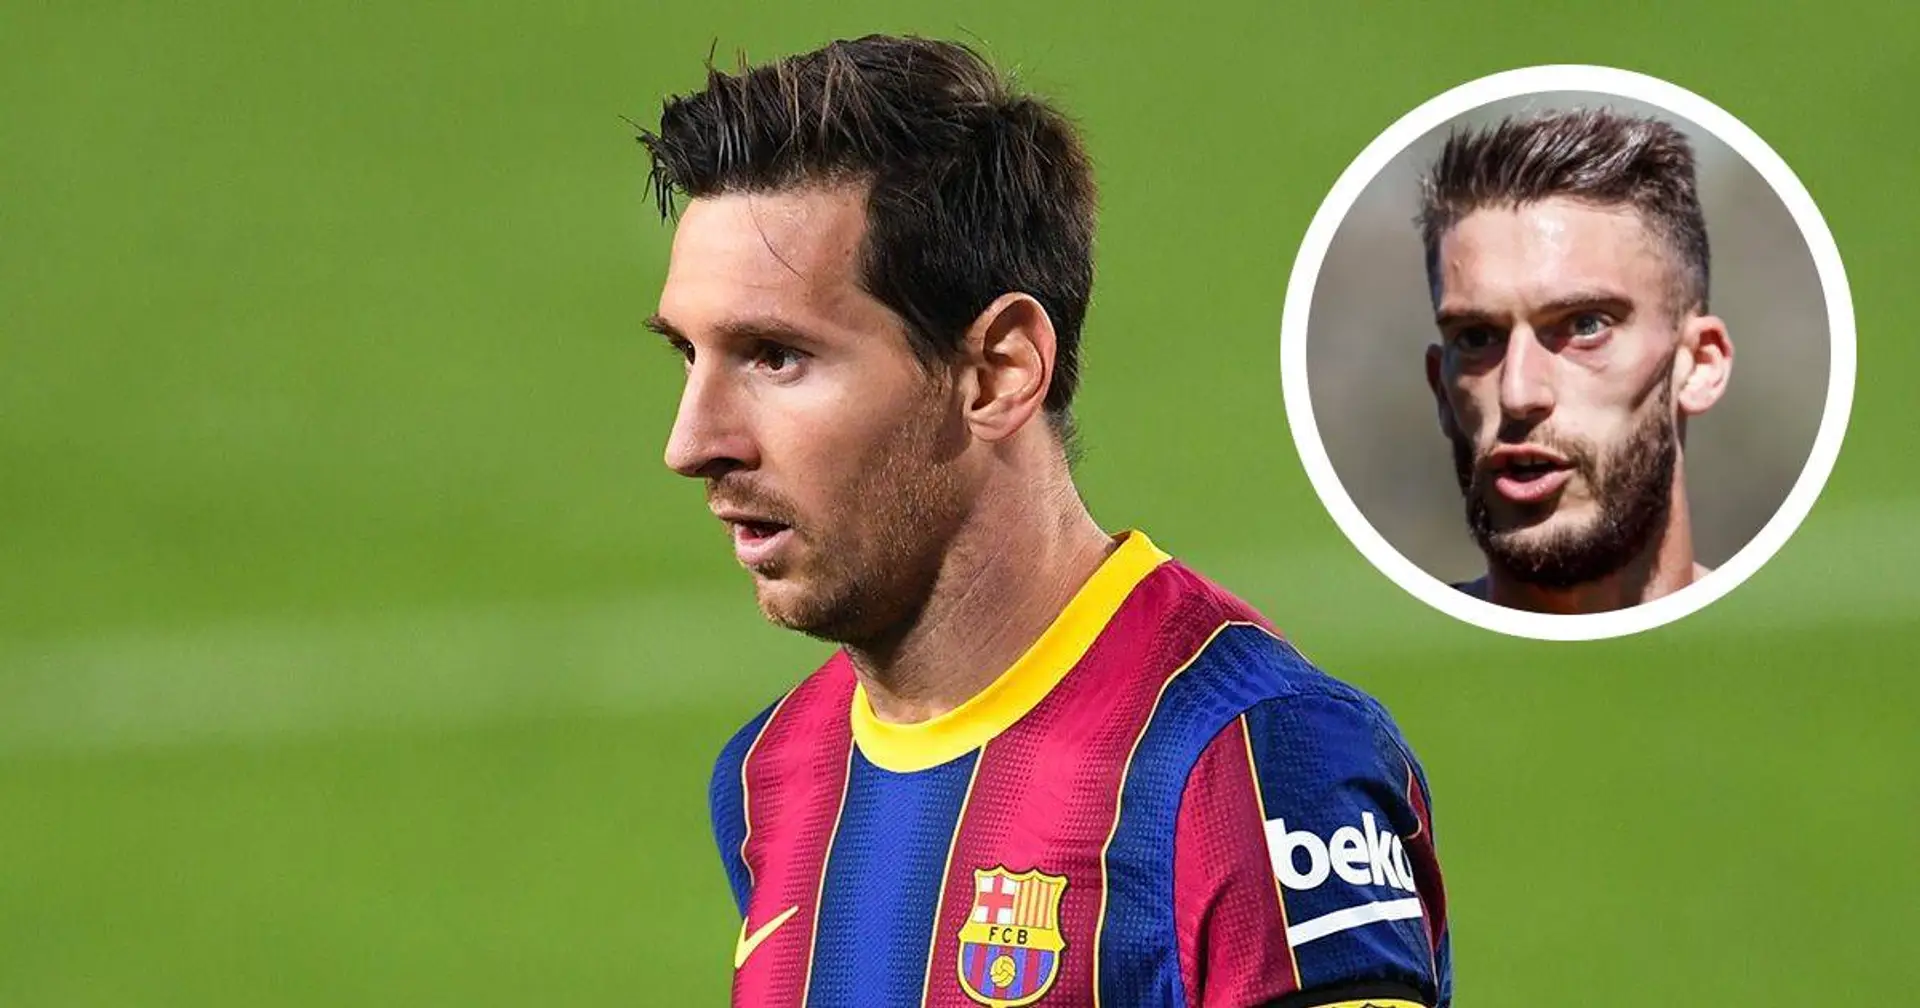 'You have to put out a red carpet for Messi': Osasuna's star Torres calls for respect for Leo